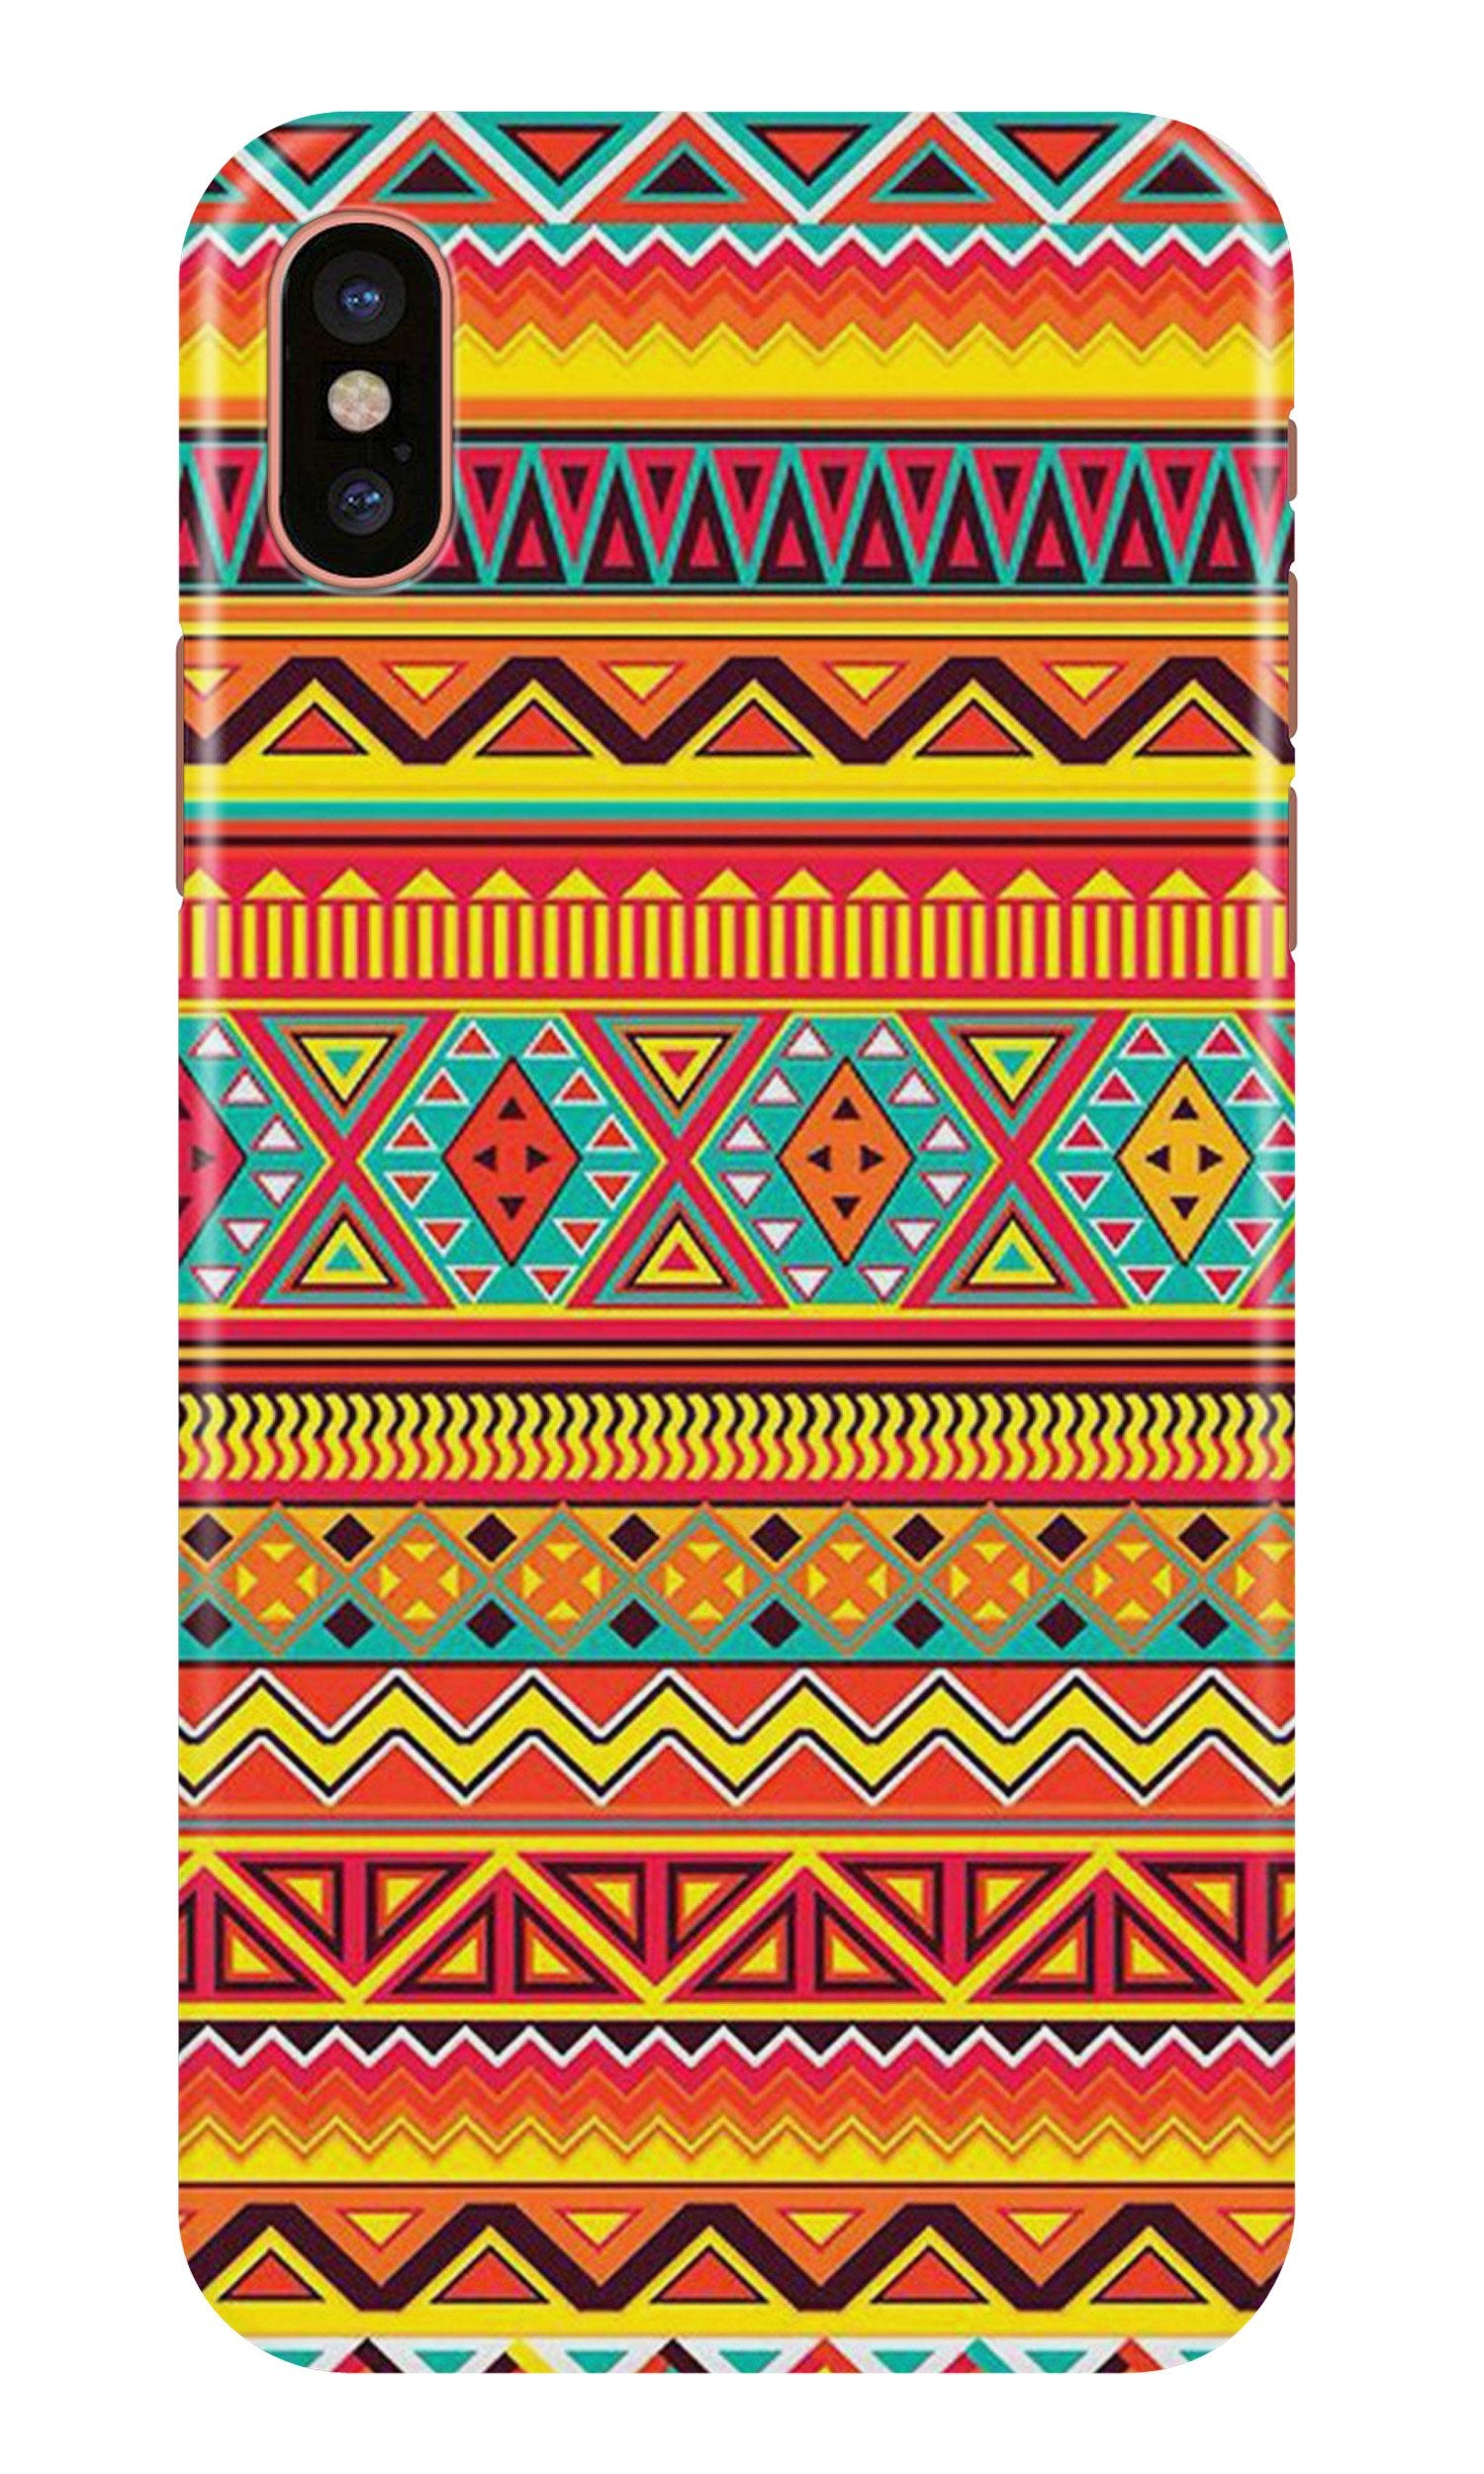 Zigzag line pattern Case for iPhone X